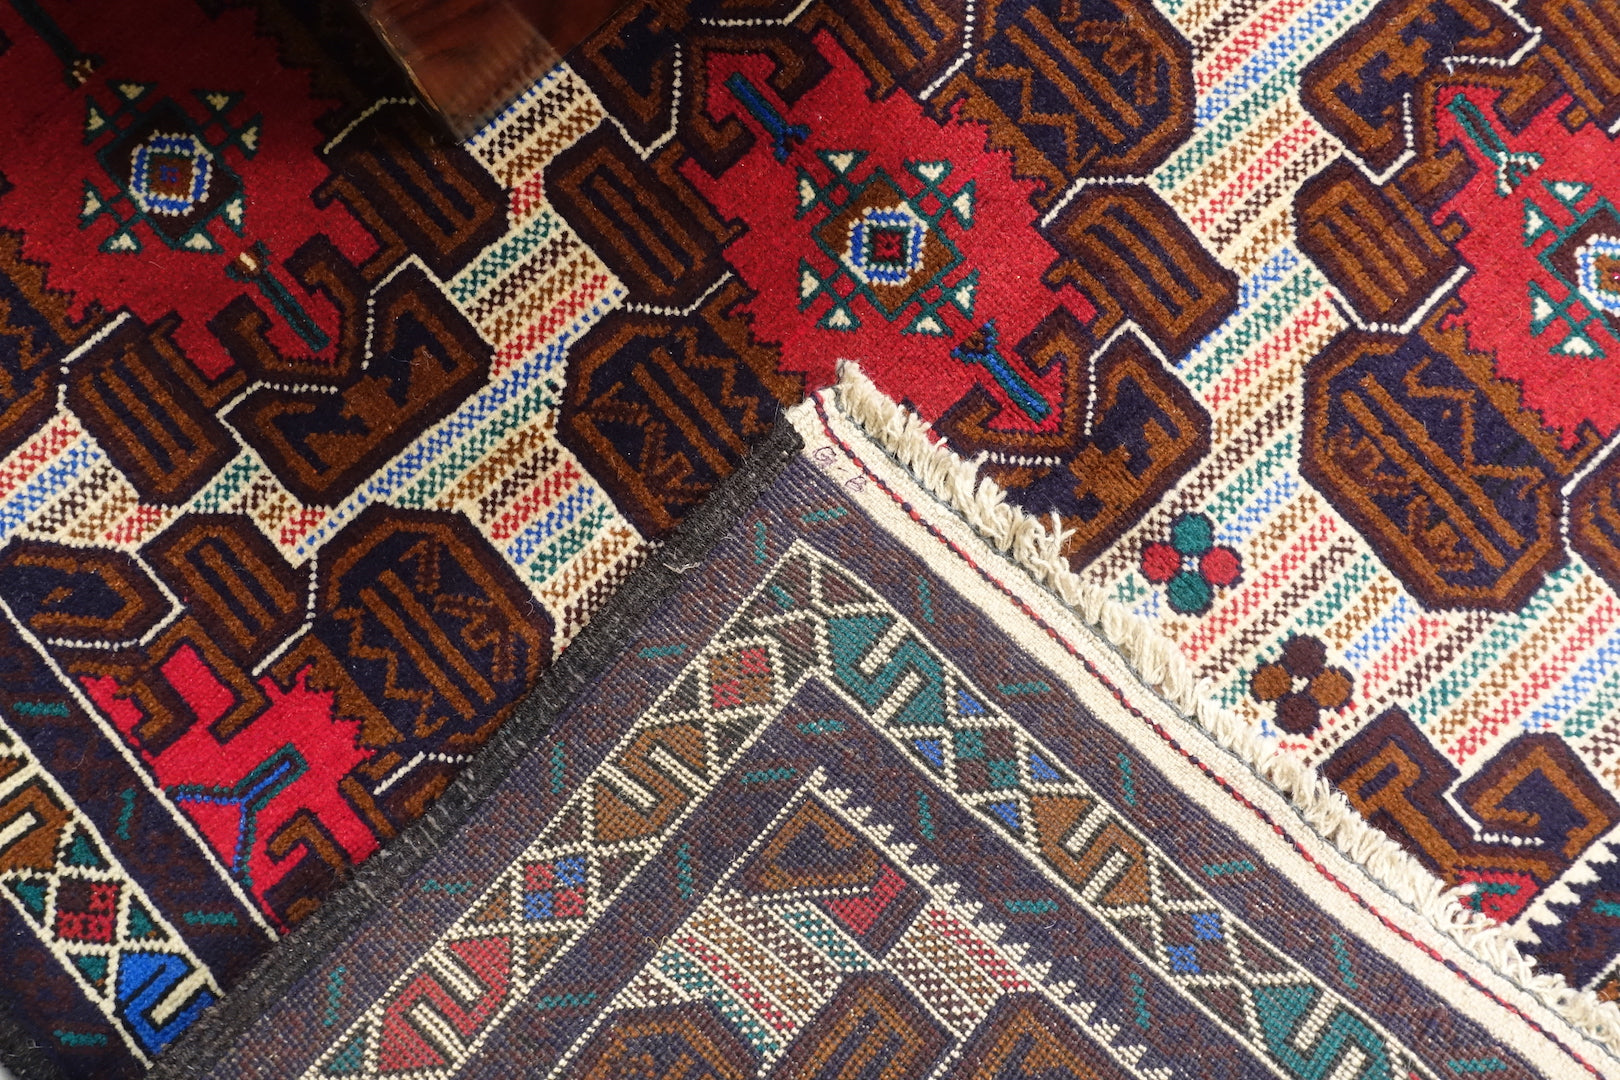 This Afghan wool rug measures 3 feet 9 inches by 6 feet 6 inches. The colours used on the rug are teal, red and beige.